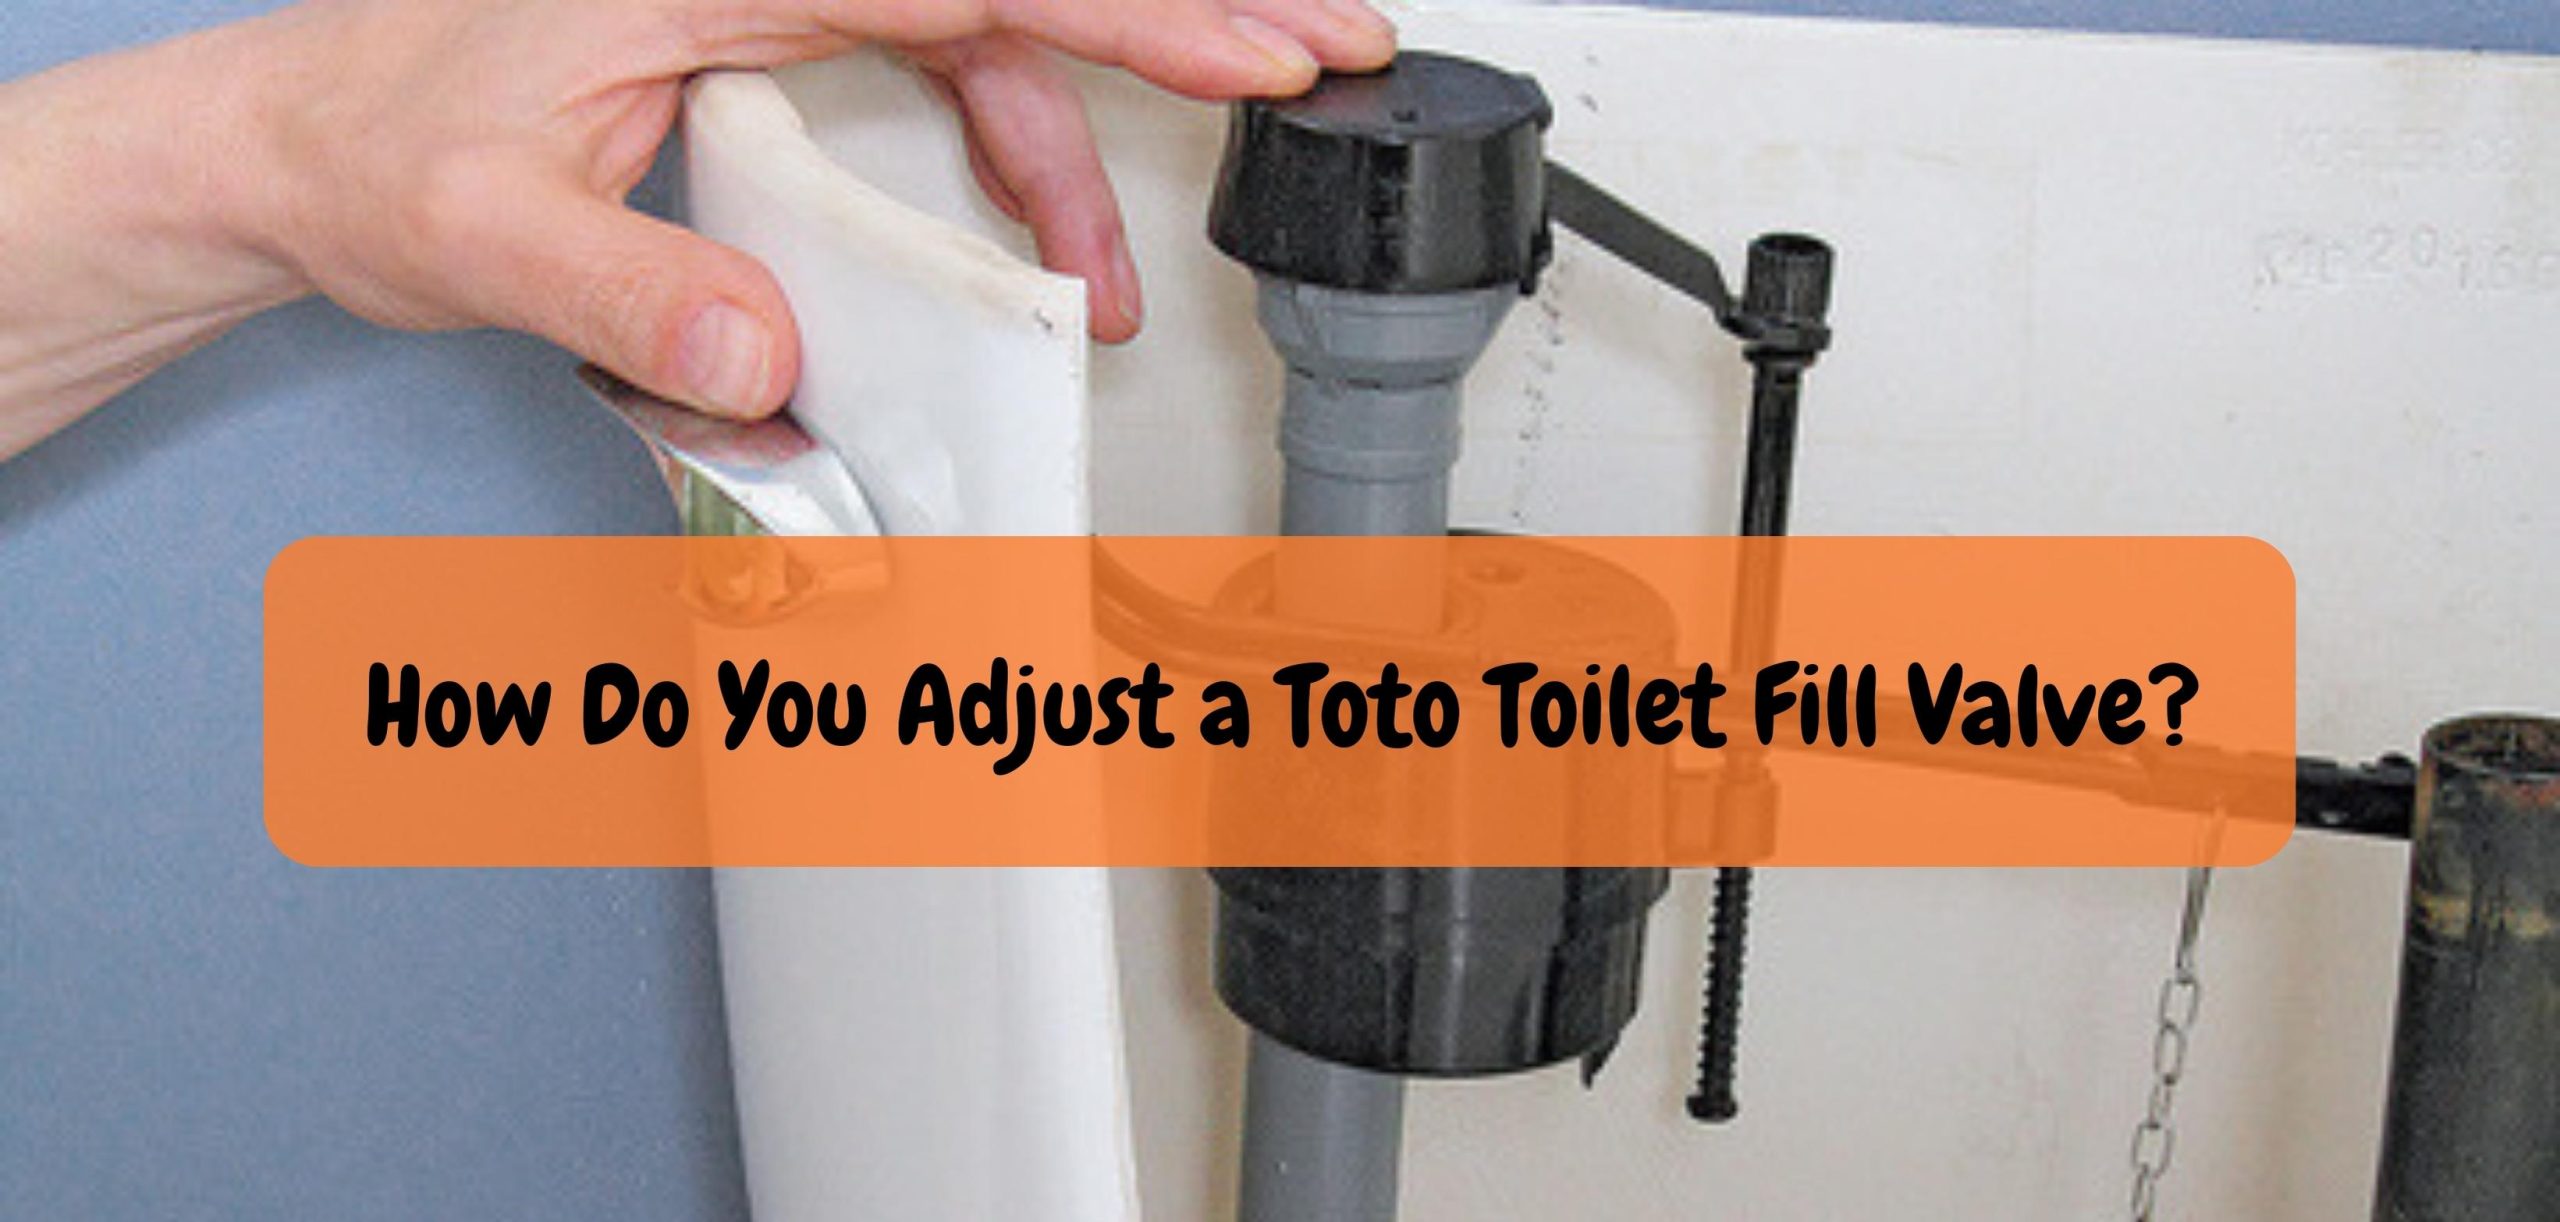 How Do You Adjust a Toto Toilet Fill Valve